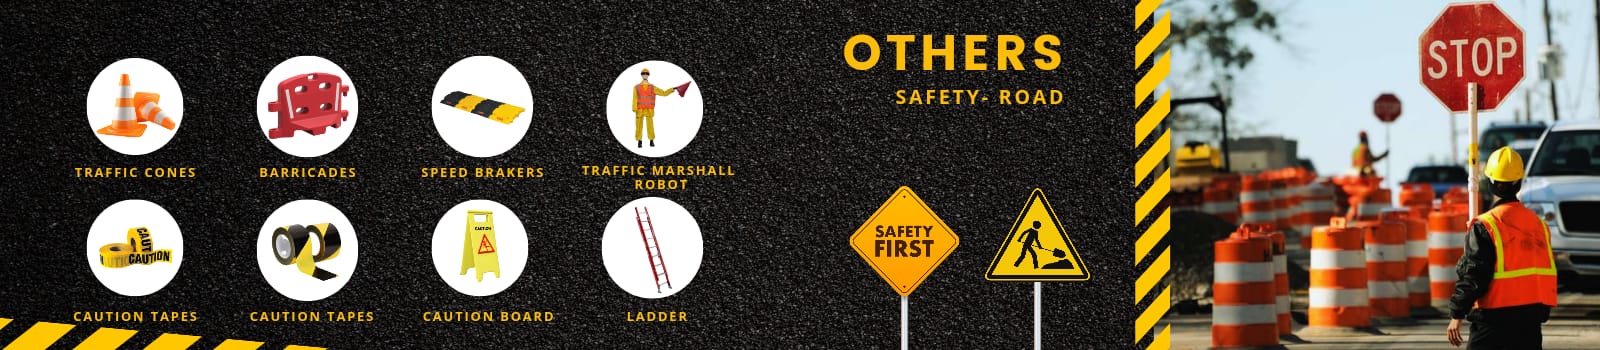 Ensuring Safety: A Comprehensive Guide to PAYUH INDUSTRIES, the Trusted Manufacturer and Distributor of Affordable Safety Products in India